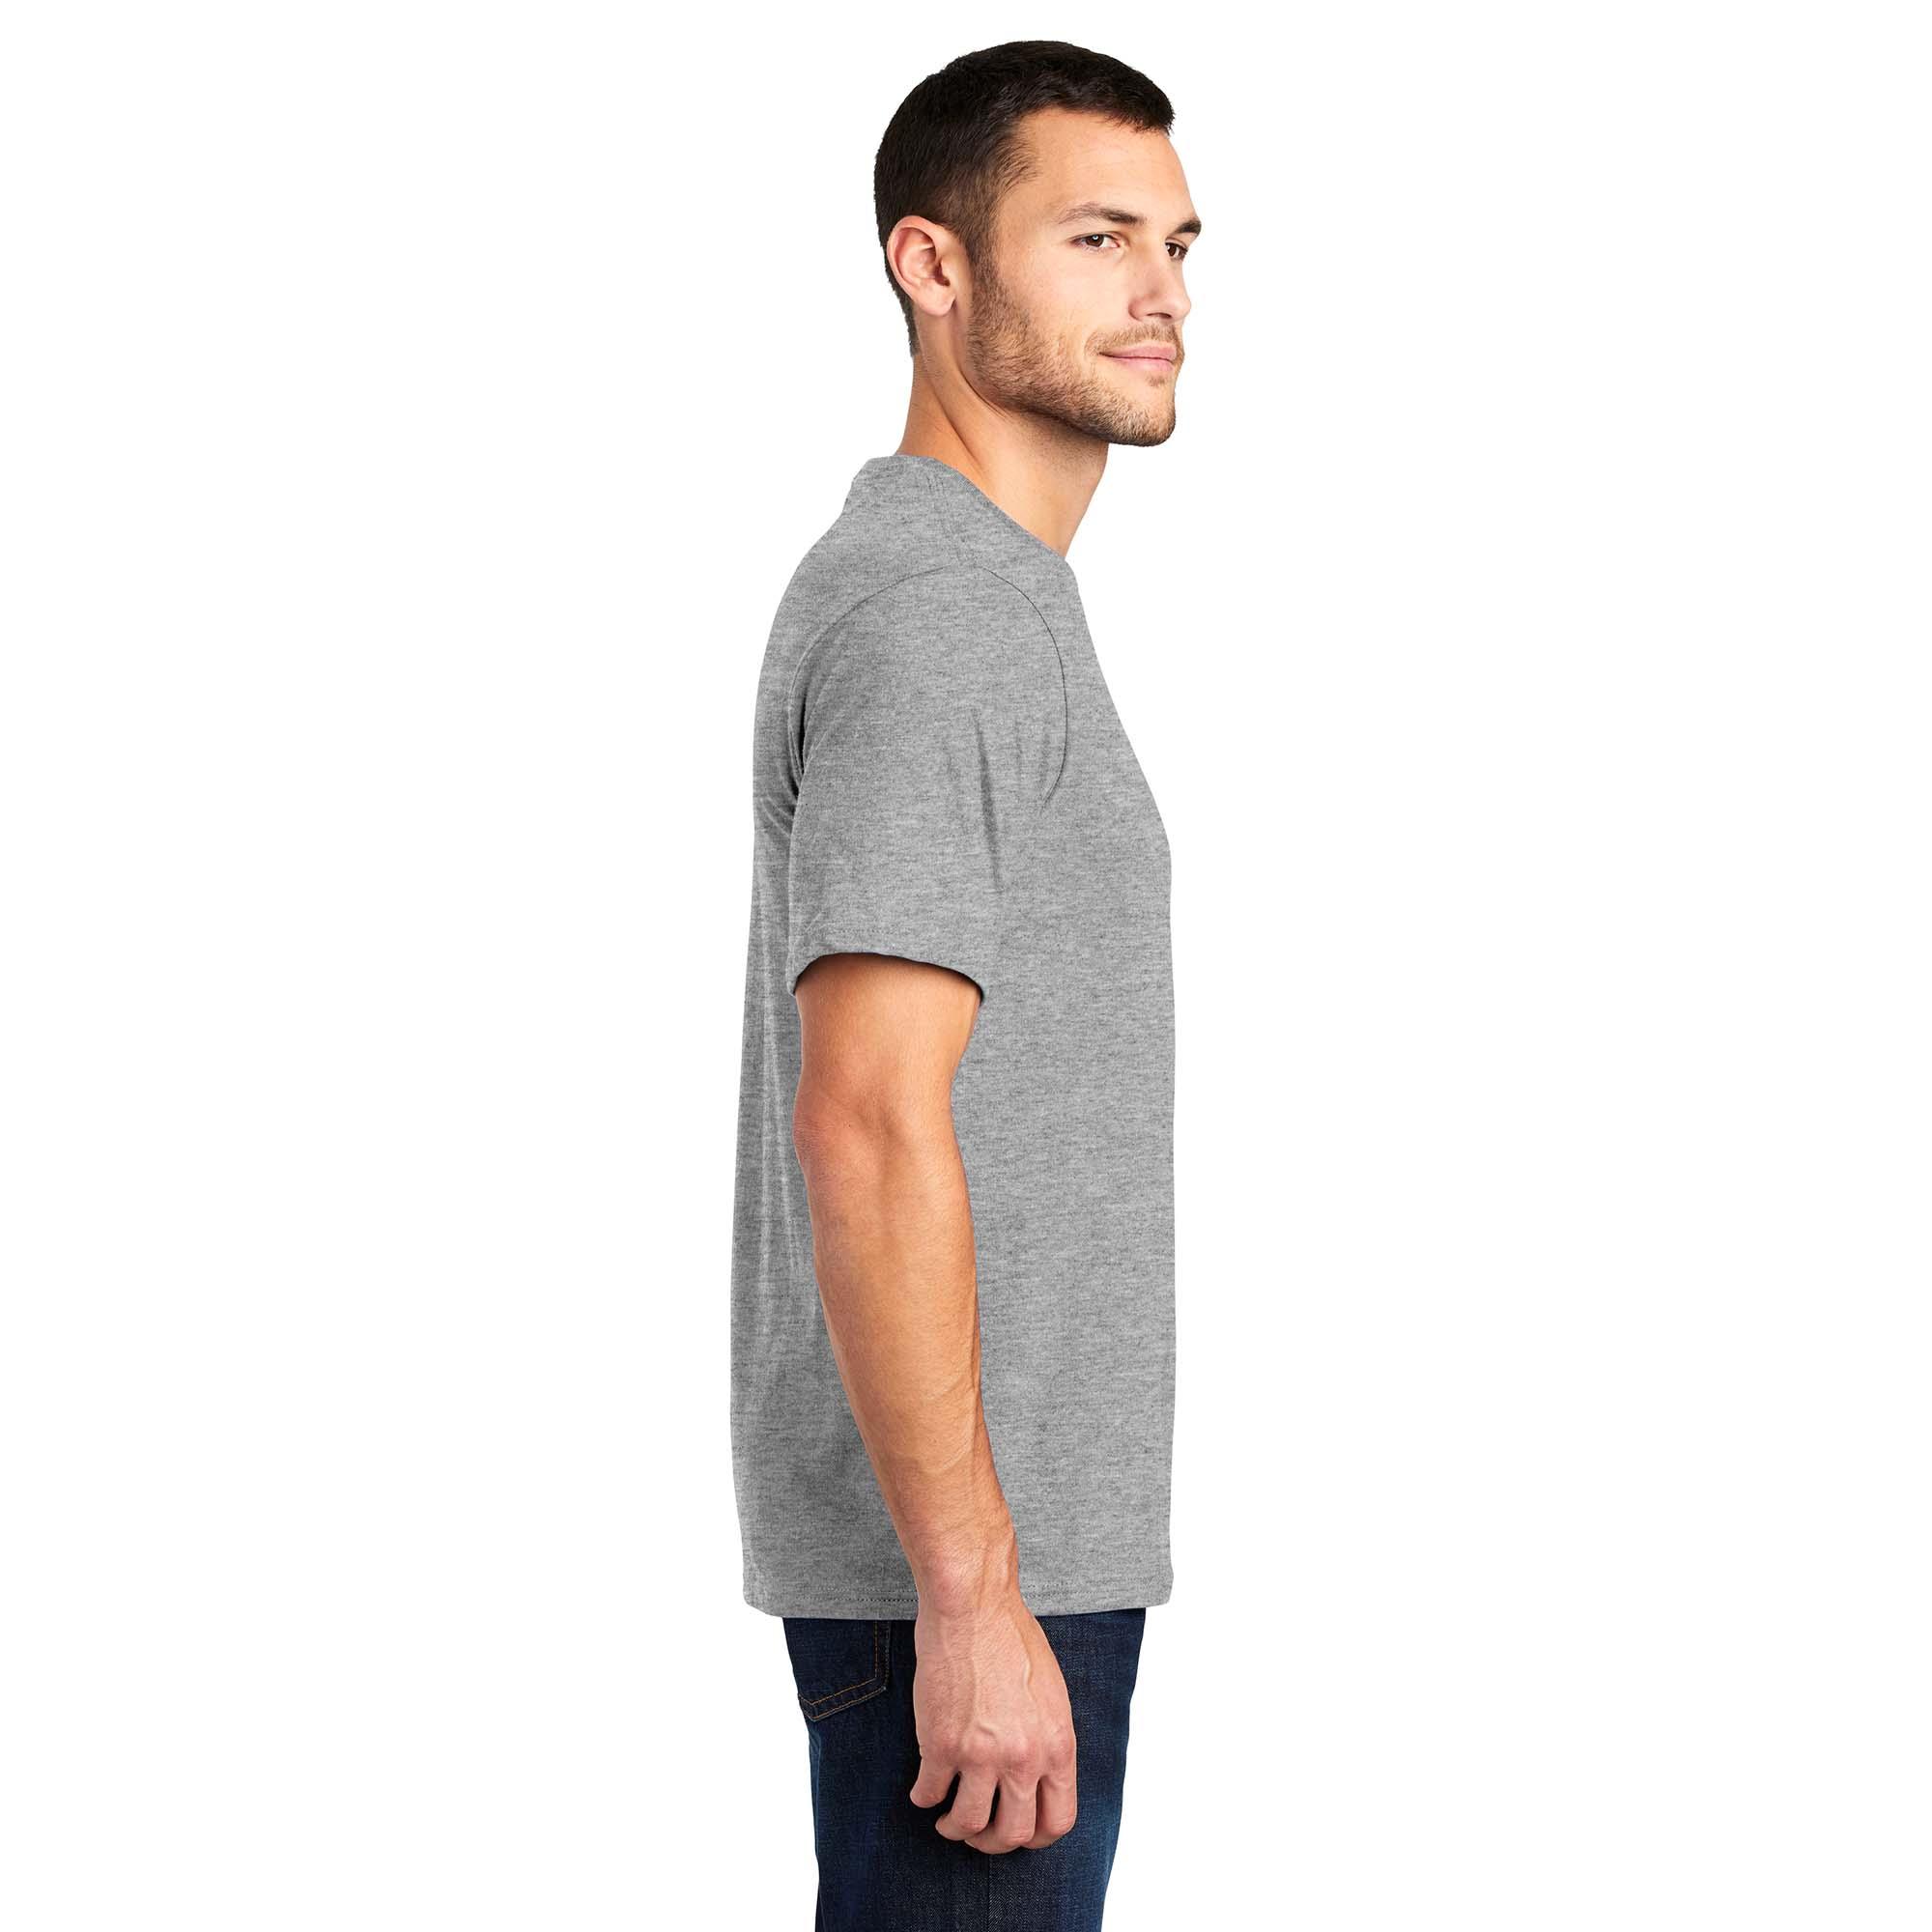 District DT6000 Very Important Tee - Light Heather Grey